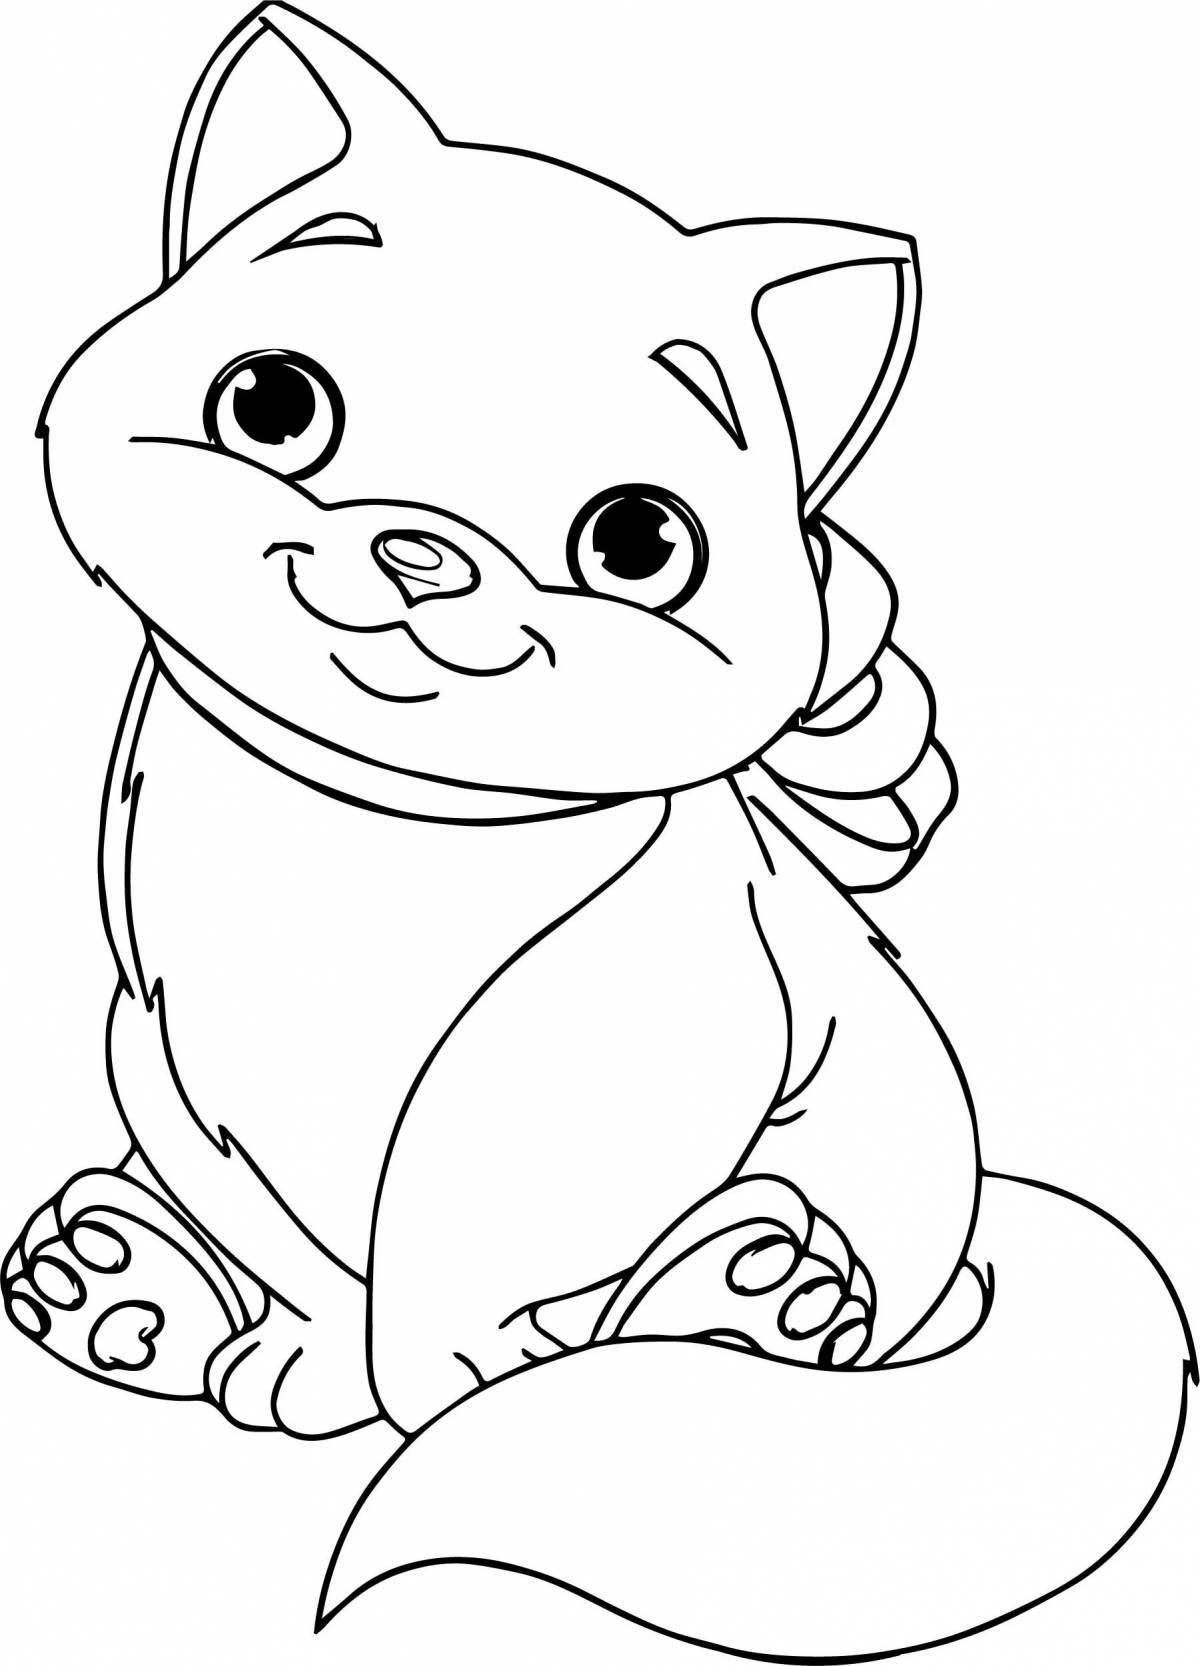 Coloring book fluffy little cute kittens